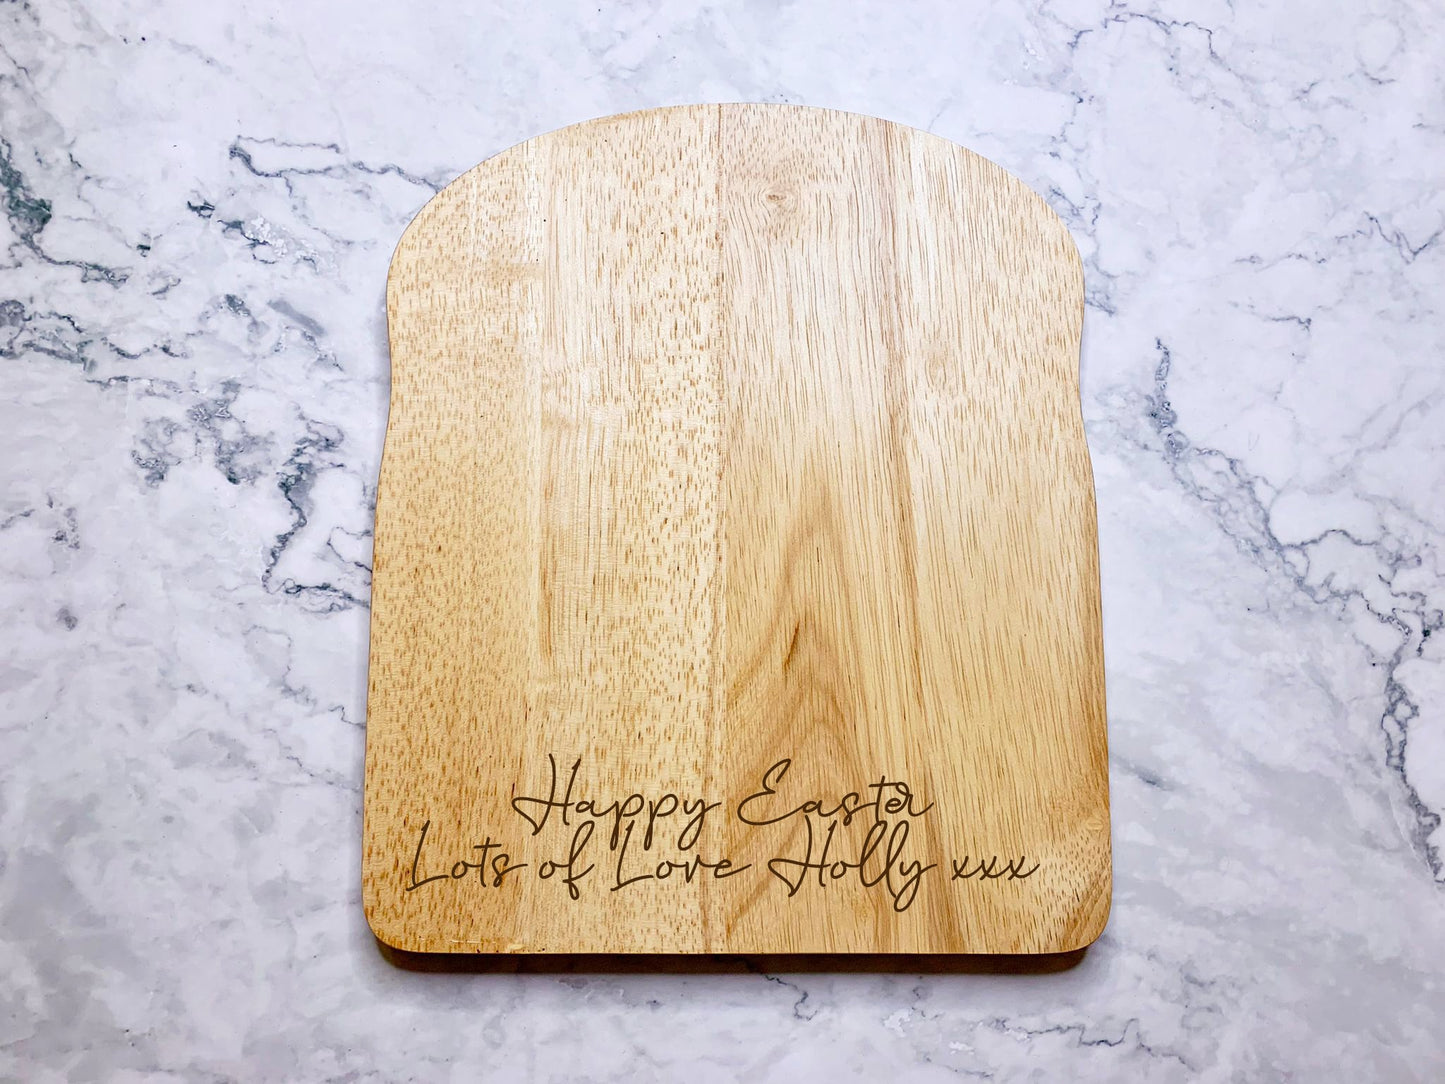 Personalised Dippy Eggs Engraved Wooden Egg and Toast Breakfast Board - Resplendent Aurora